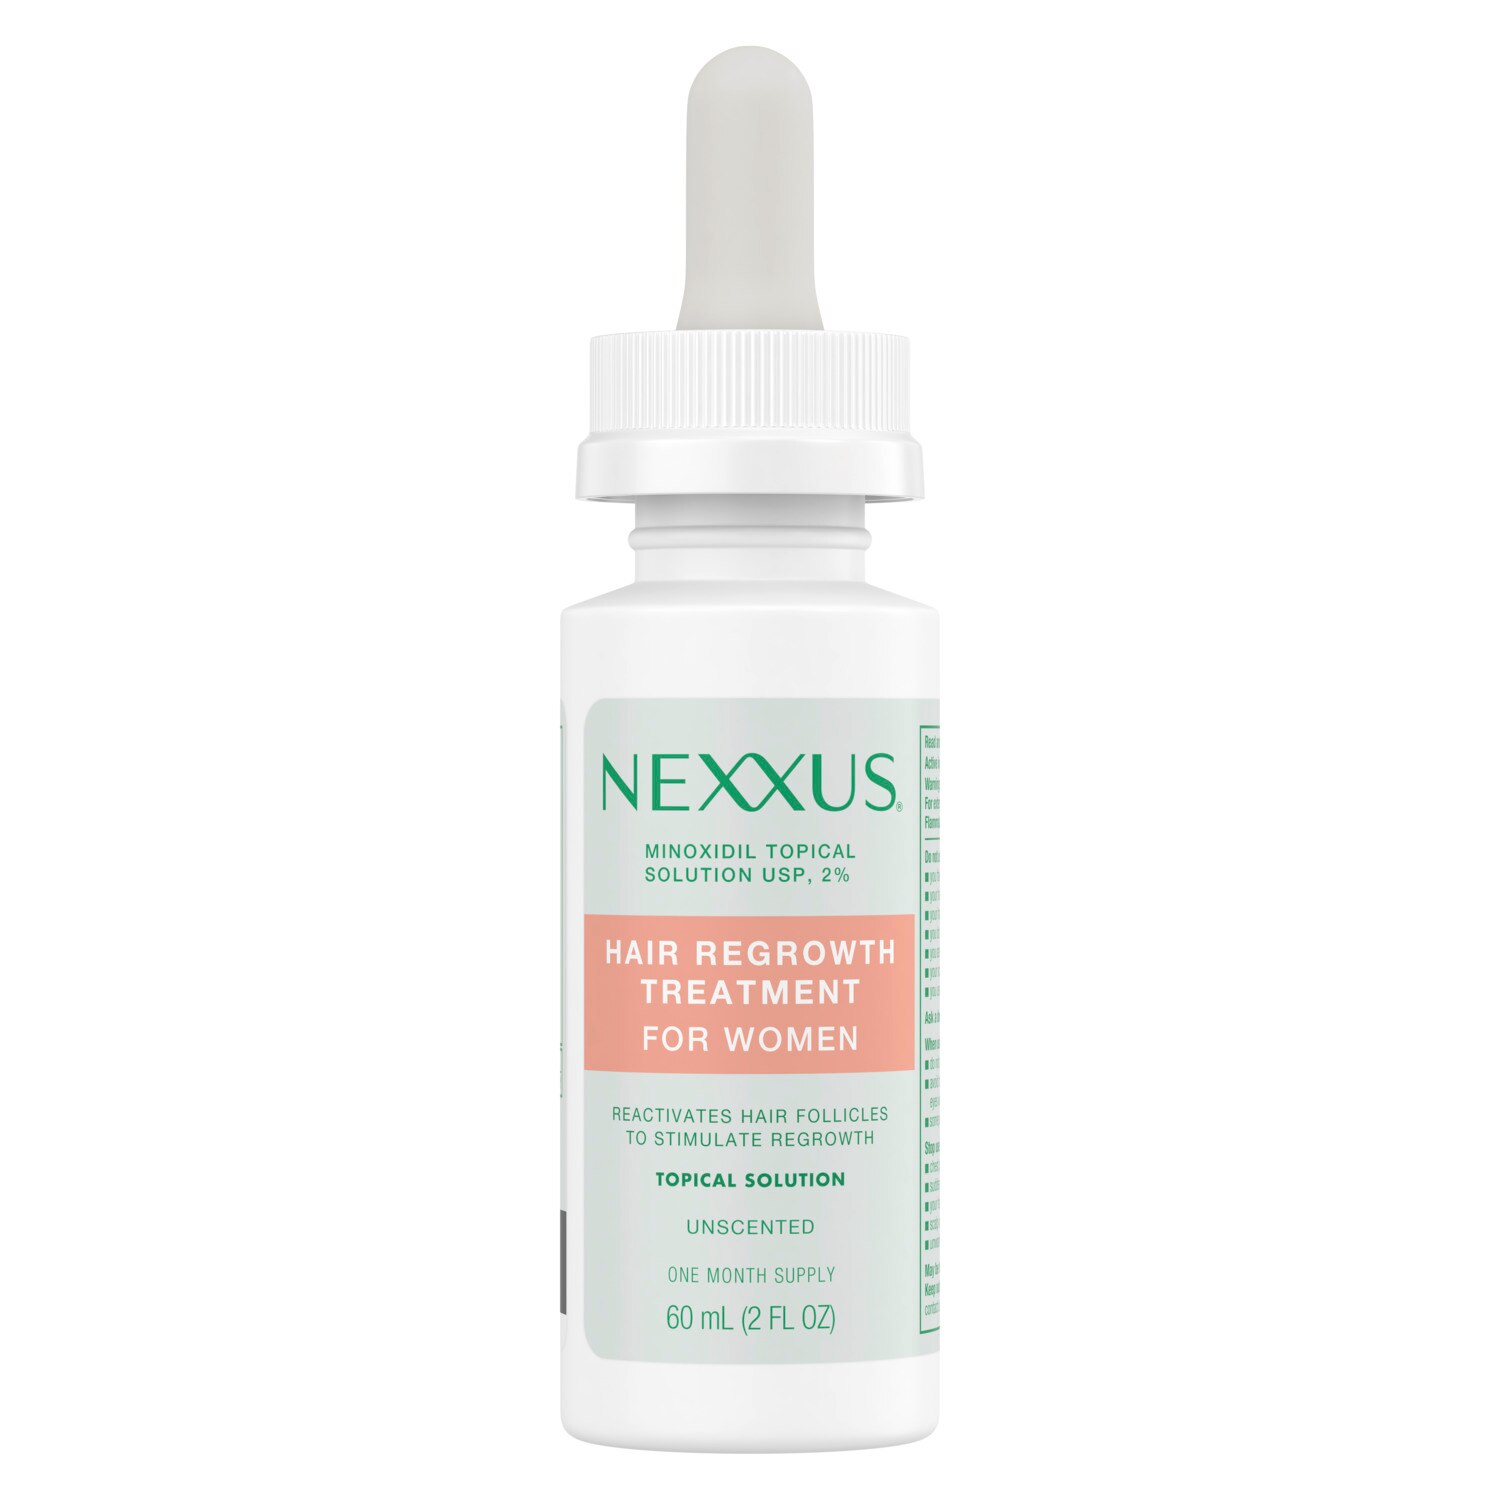 Nexxus Women's 2% Minoxidil Topical Solution For Hair Regrowth, 1-Month Supply - 2 Oz , CVS